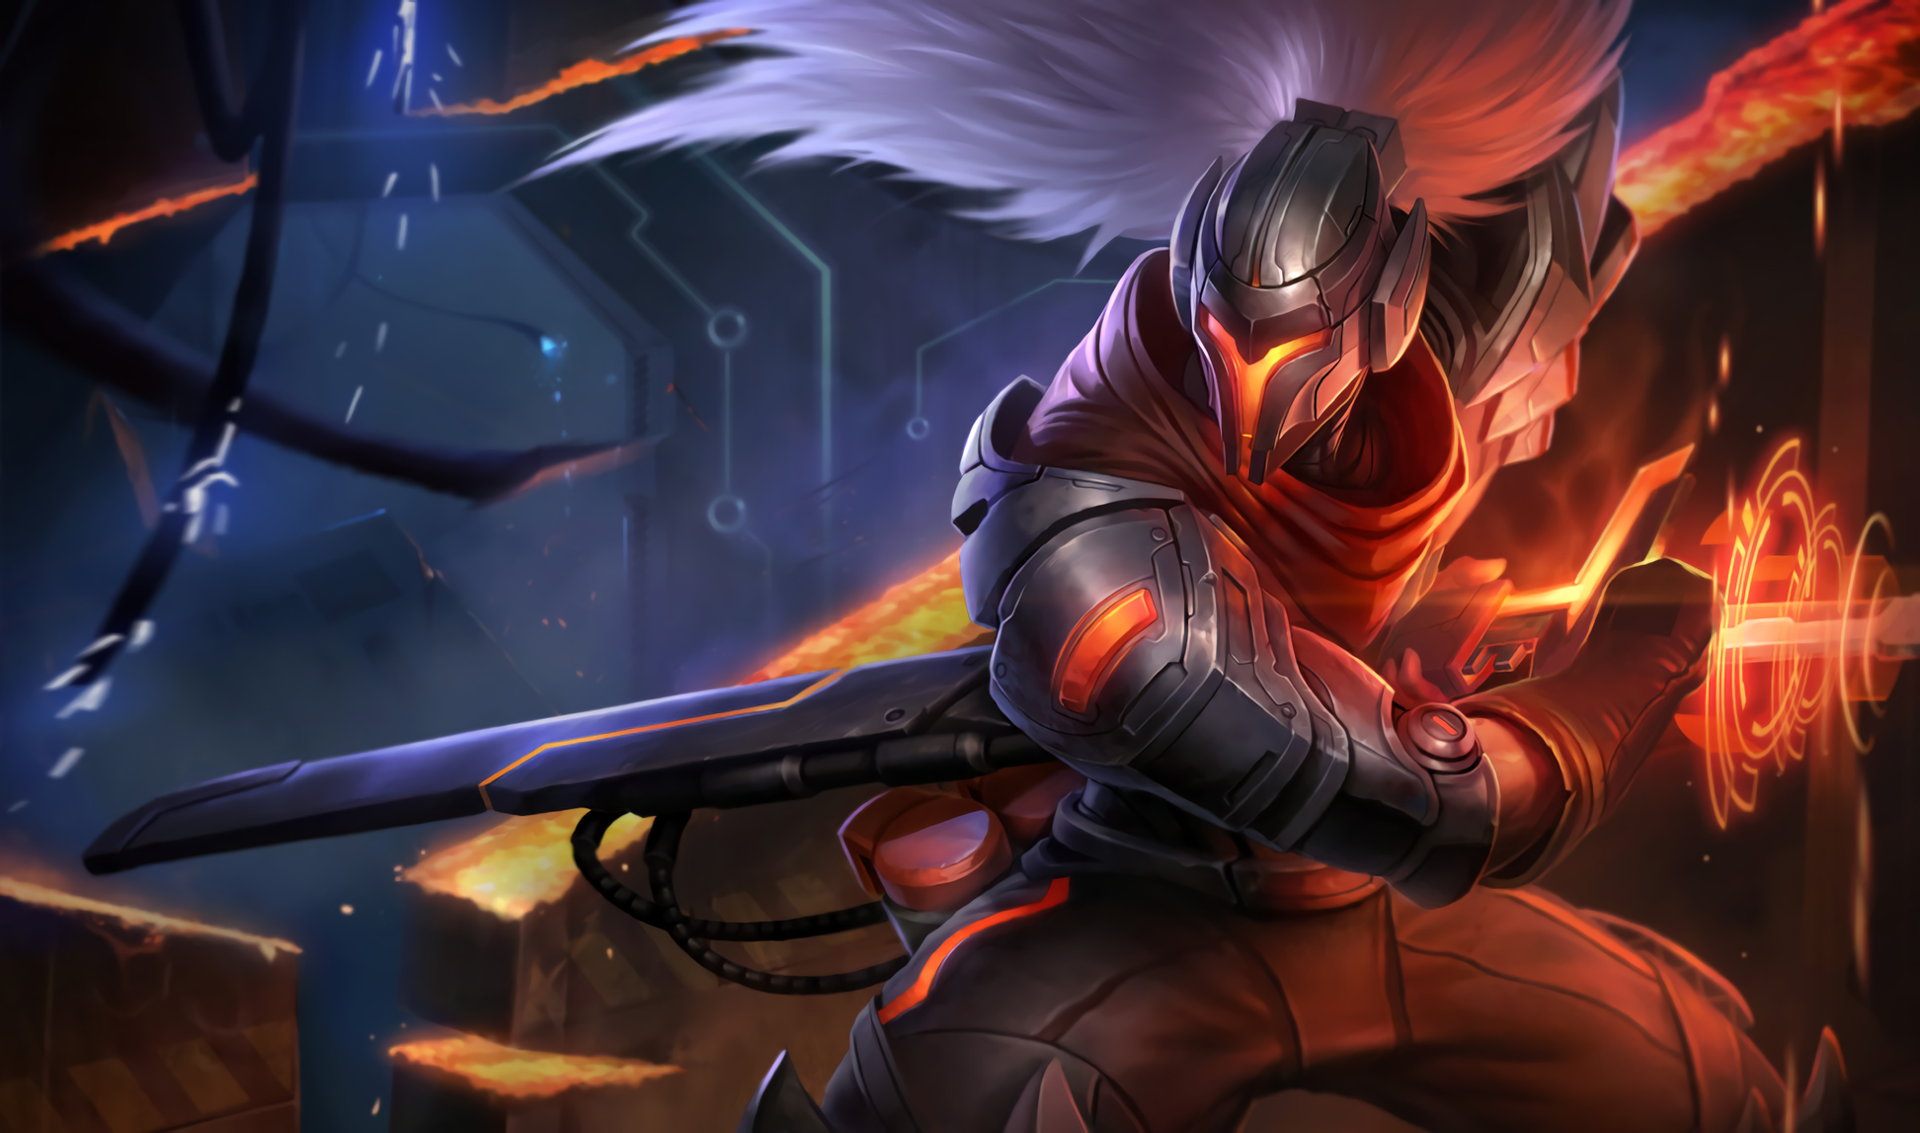 3025 League Of Legends HD Wallpapers | Backgrounds - Wallpaper Abyss